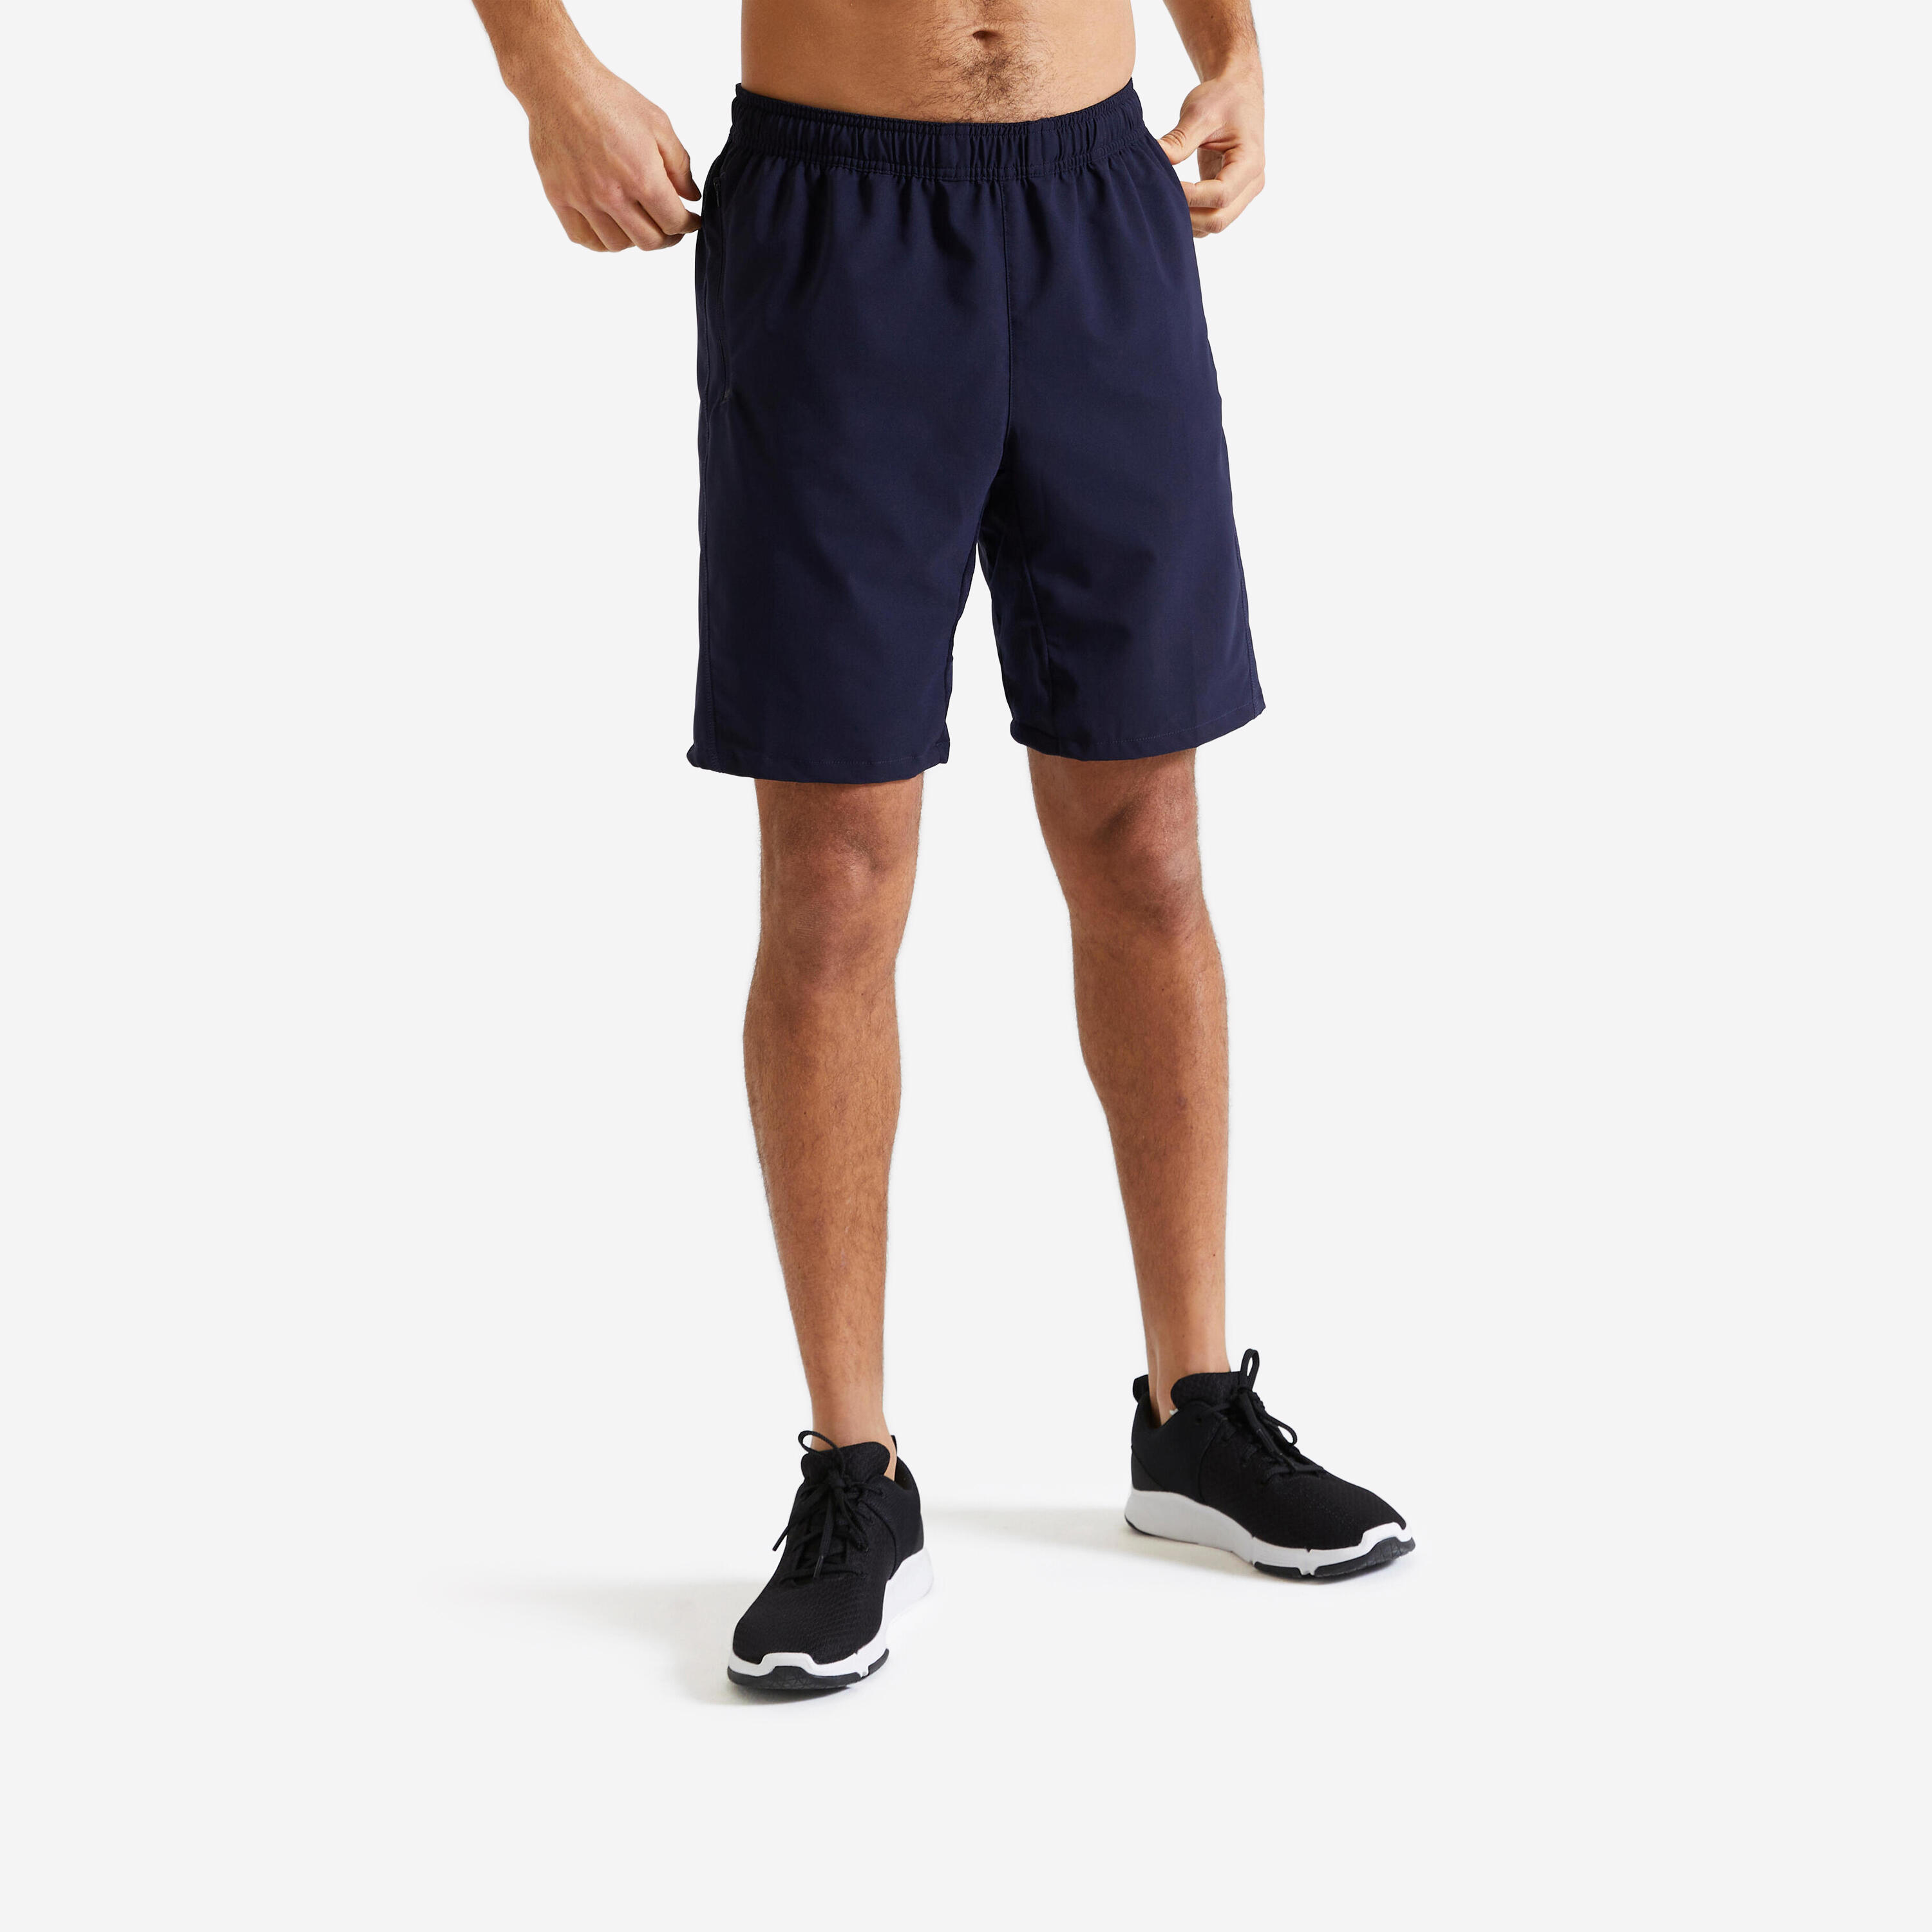 Men's Zip Pocket Breathable Essential Fitness Shorts - Navy 1/5